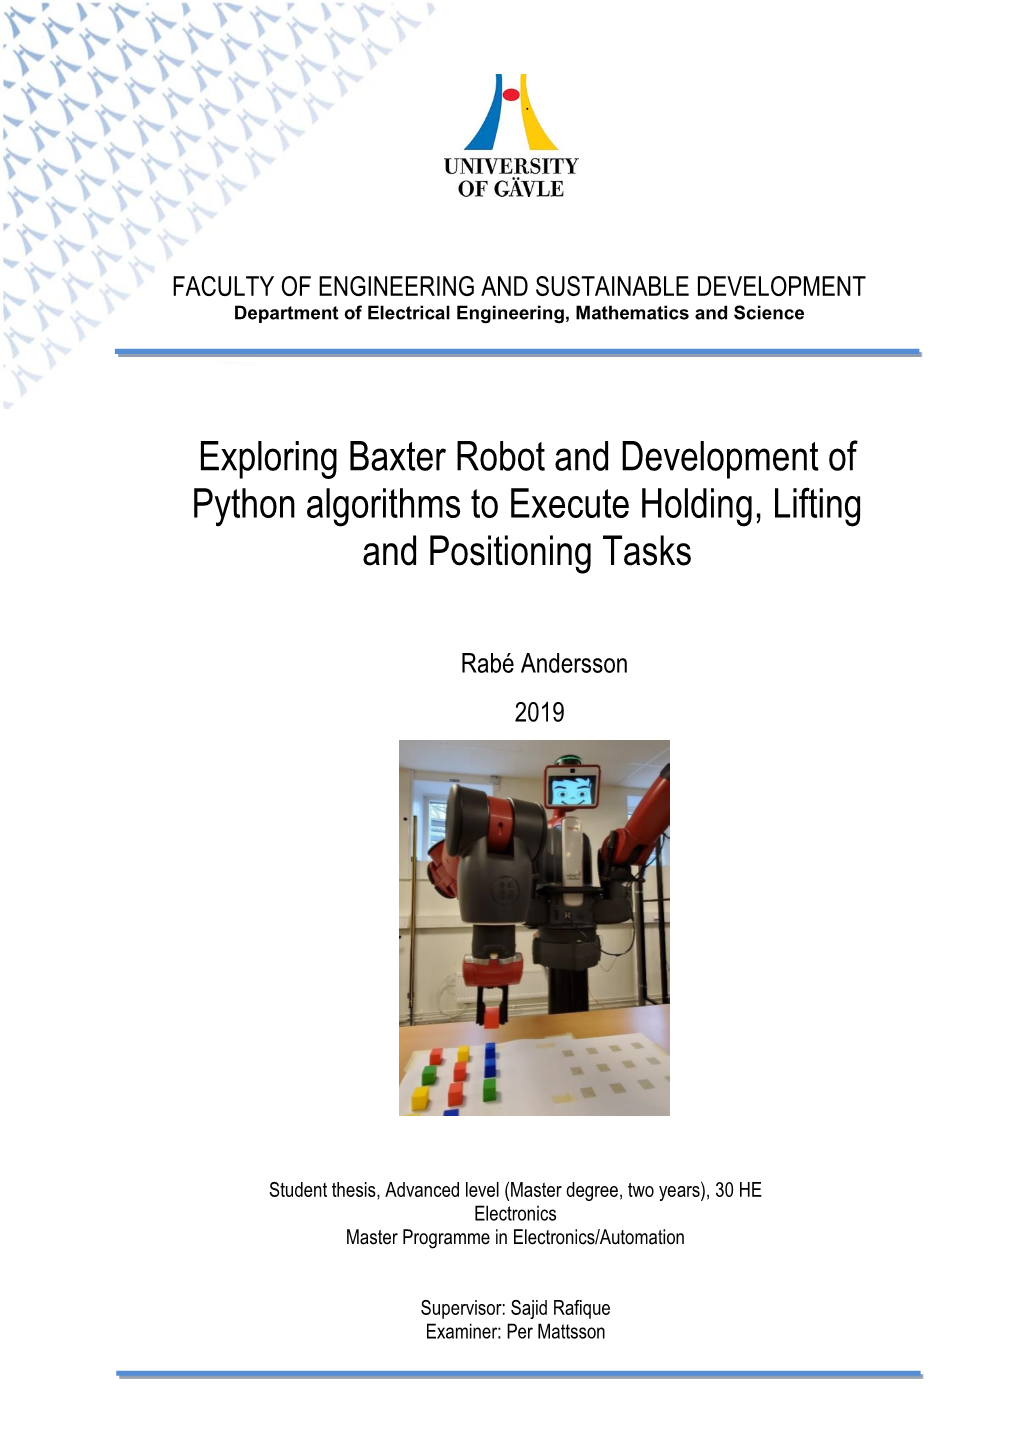 Exploring Baxter Robot and Development of Python Algorithms to Execute Holding, Lifting and Positioning Tasks